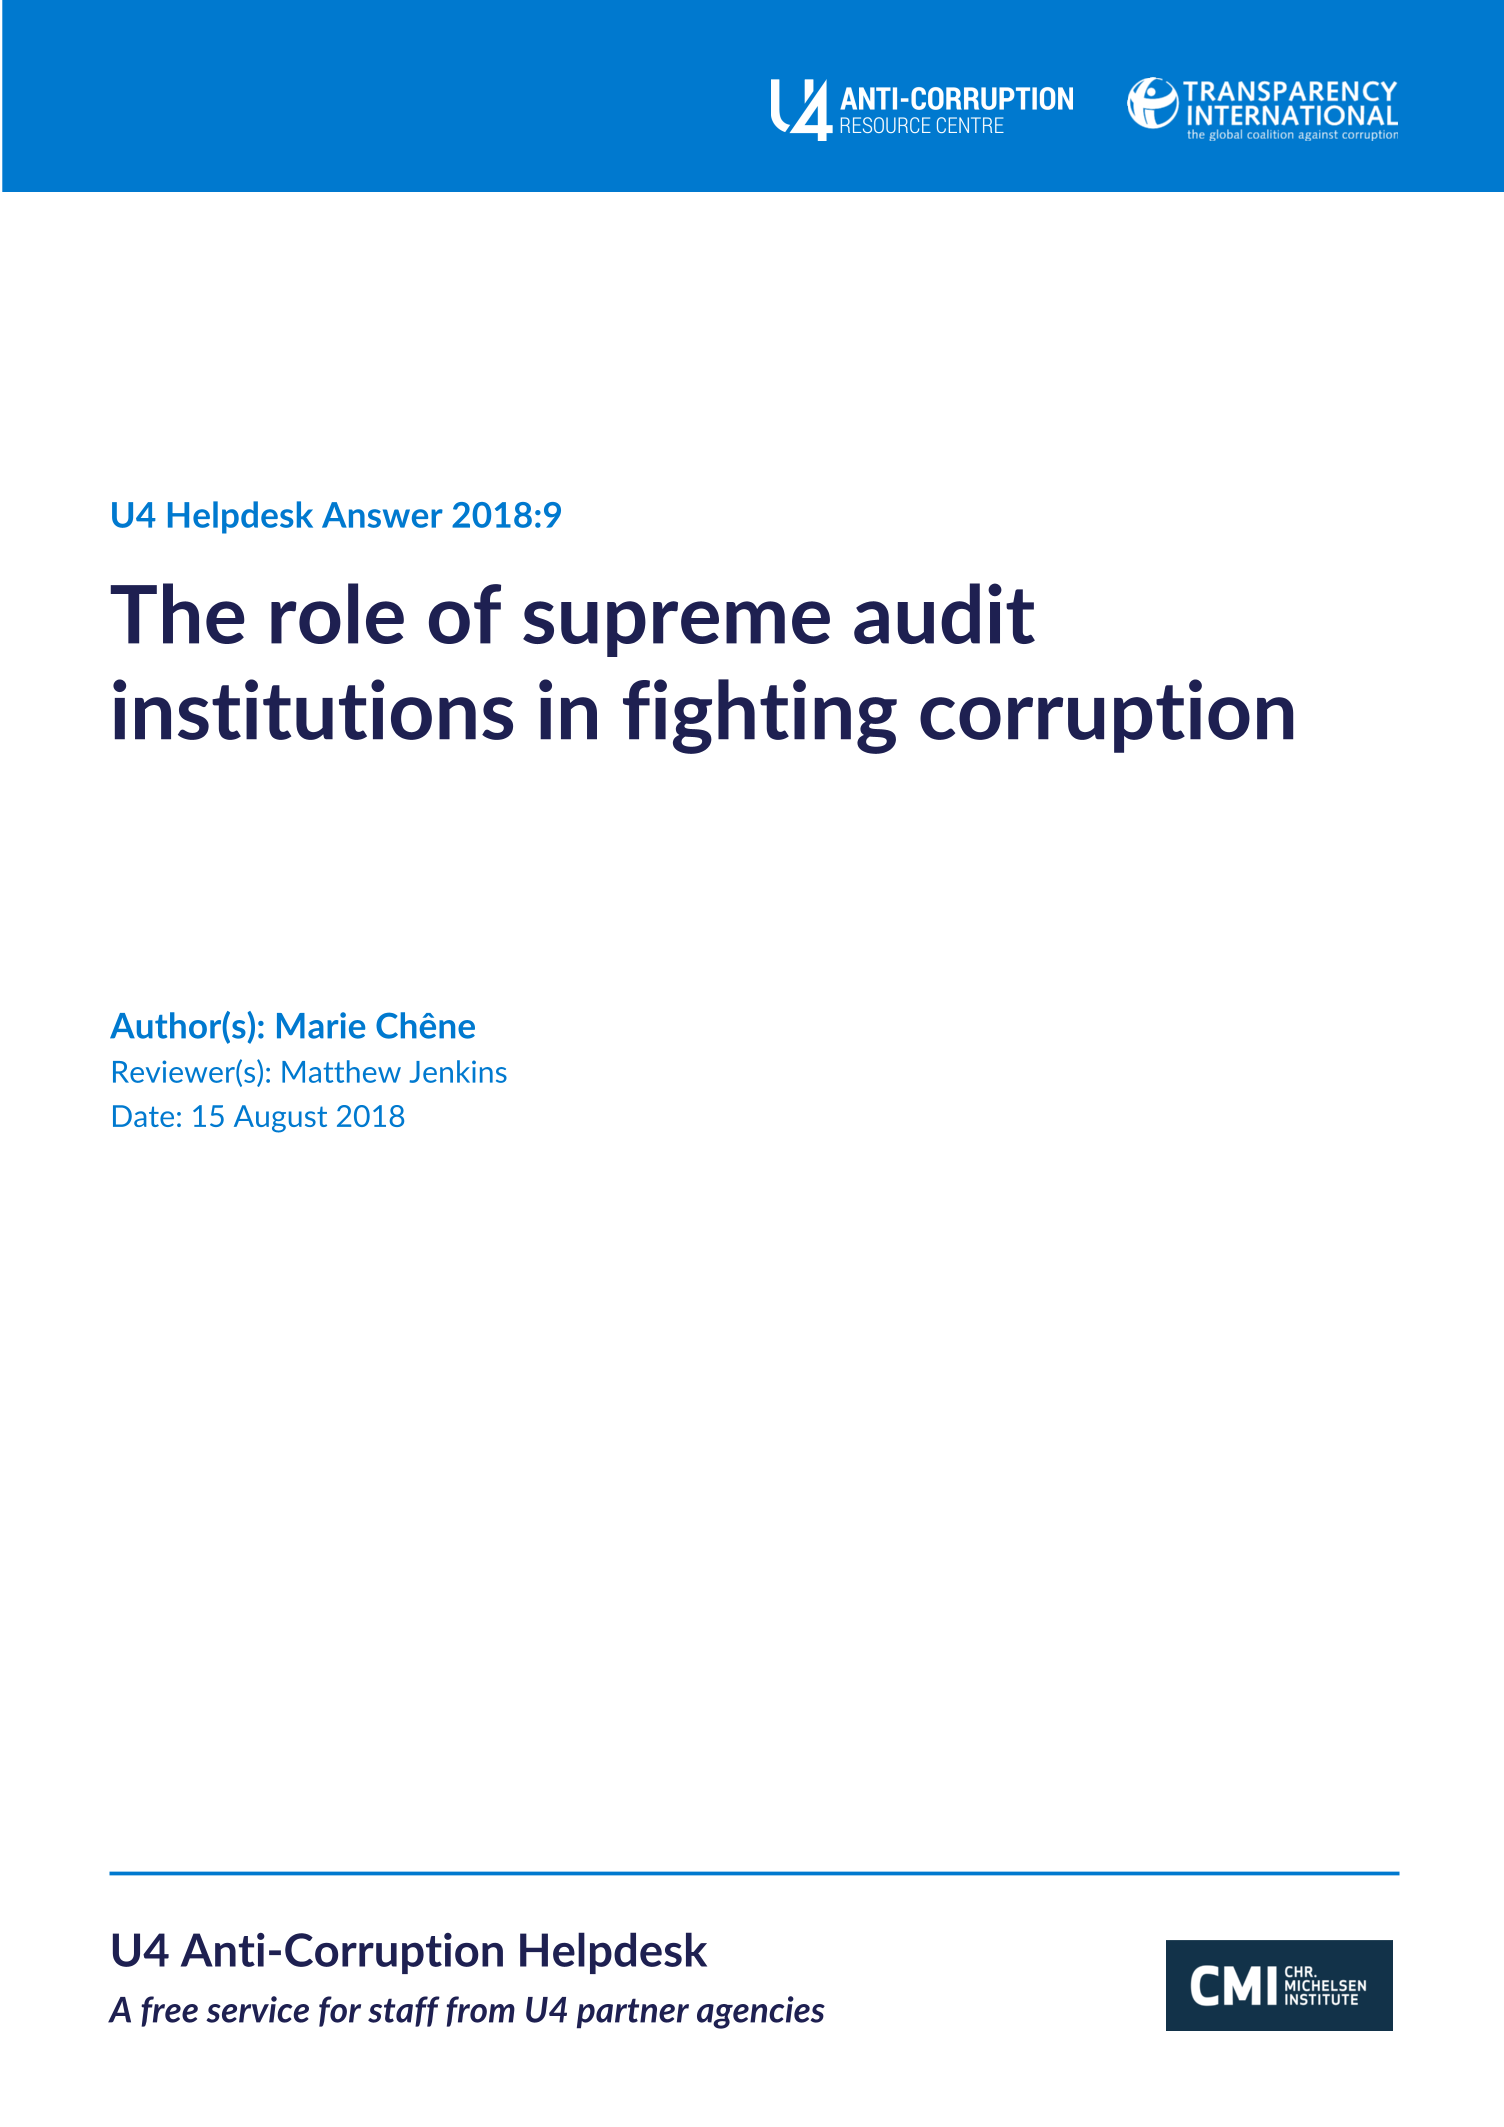 The role of supreme audit institutions in fighting corruption